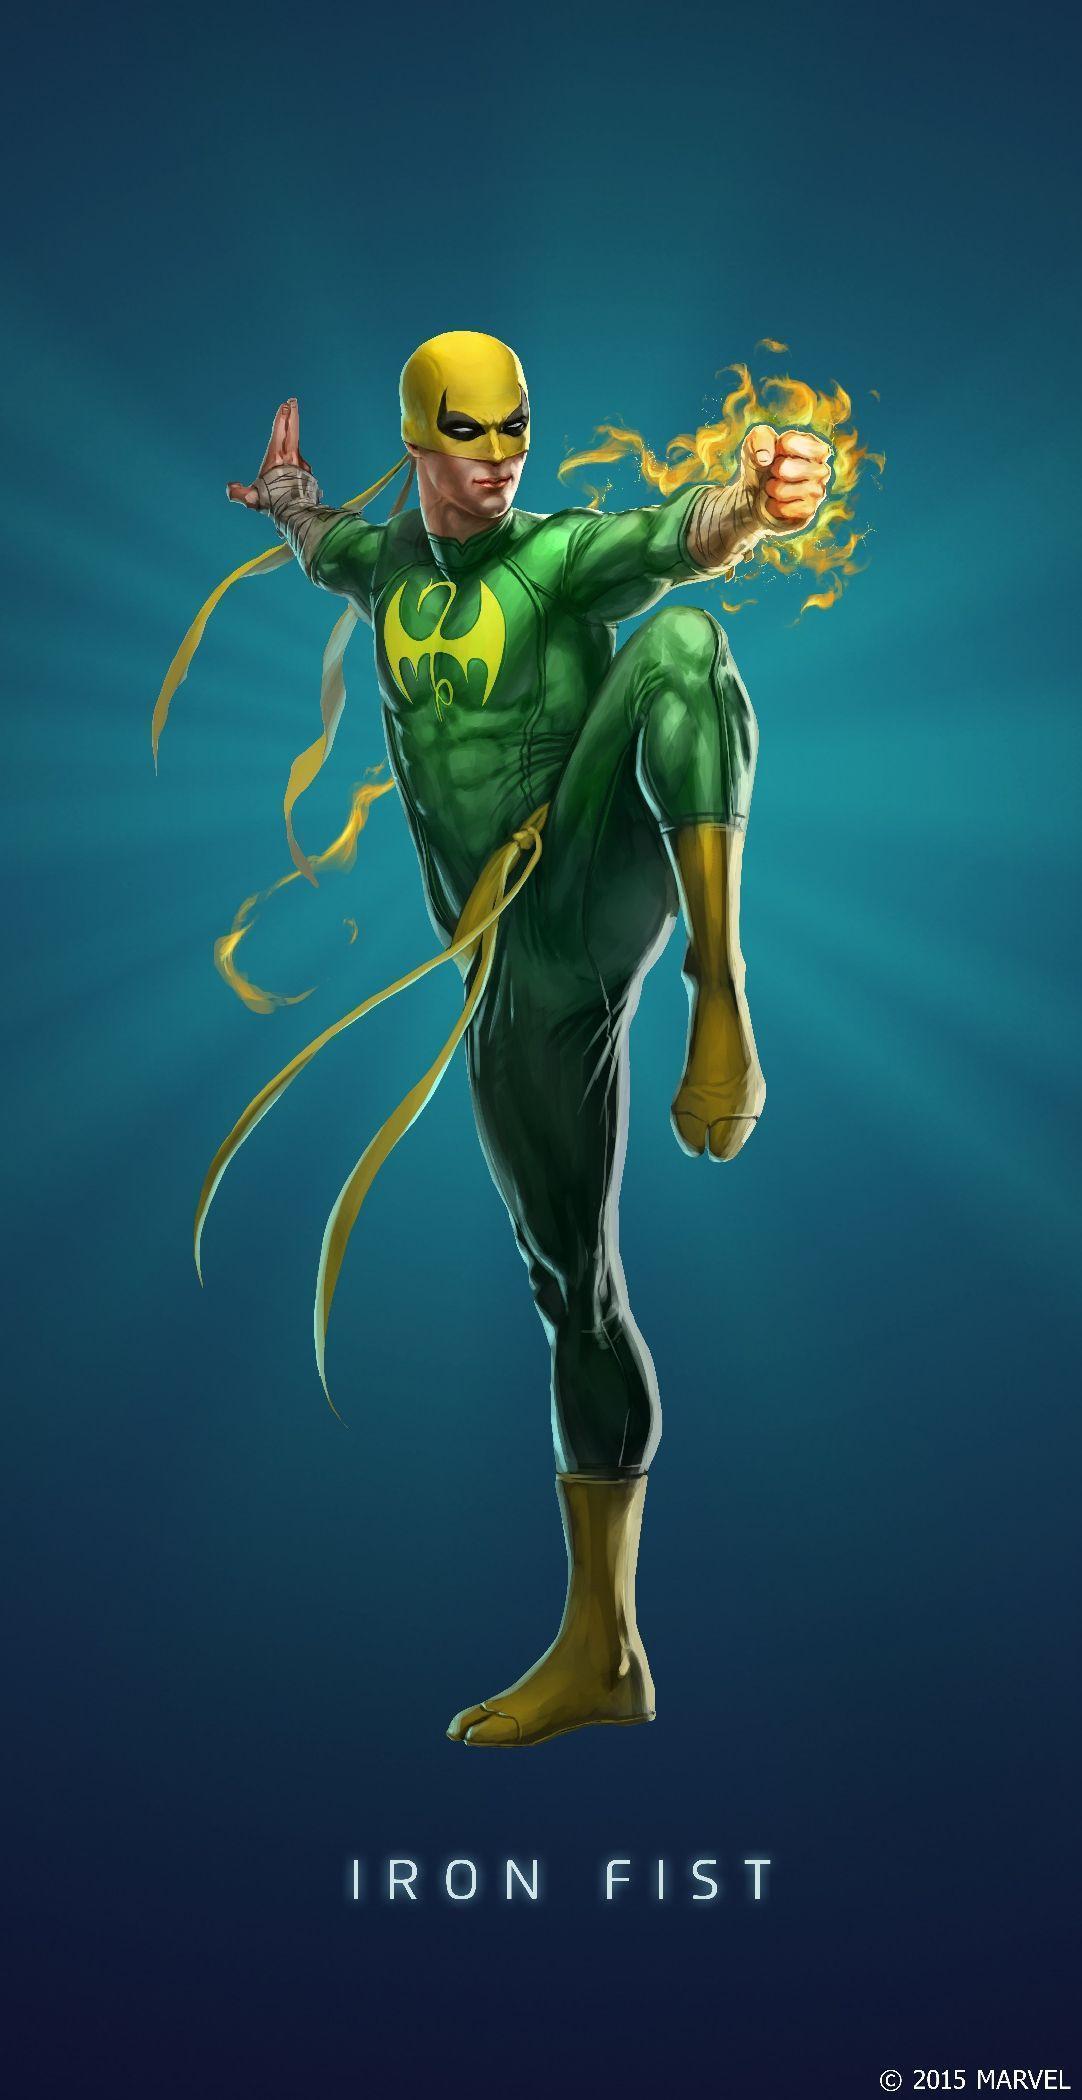 Iron Fist Marvel Wallpapers Top Free Iron Fist Marvel Backgrounds